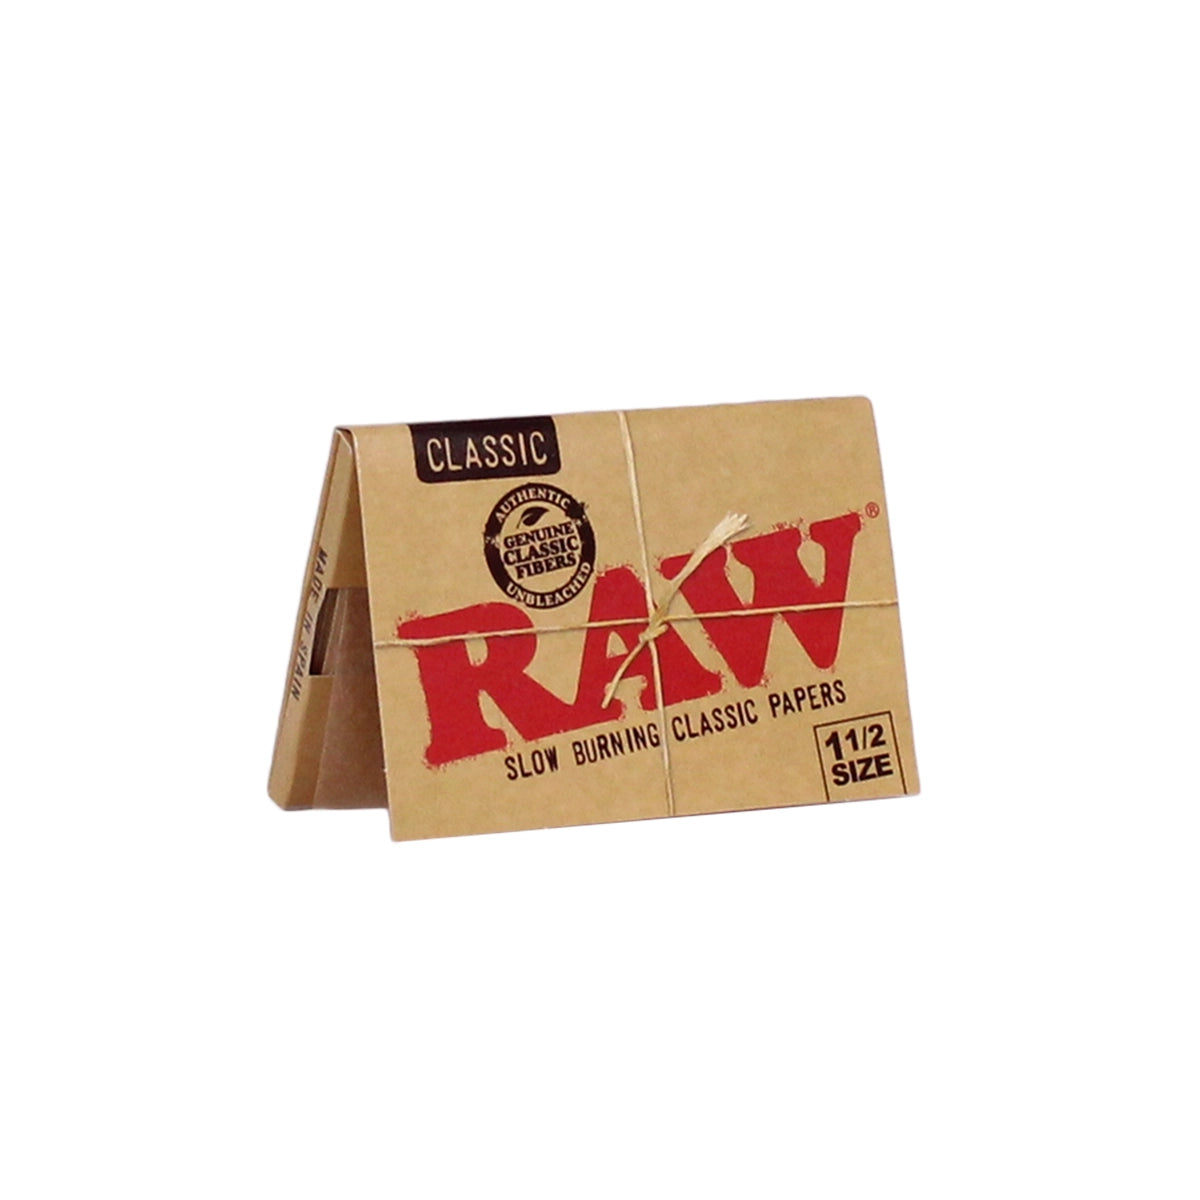 Raw "Papers"